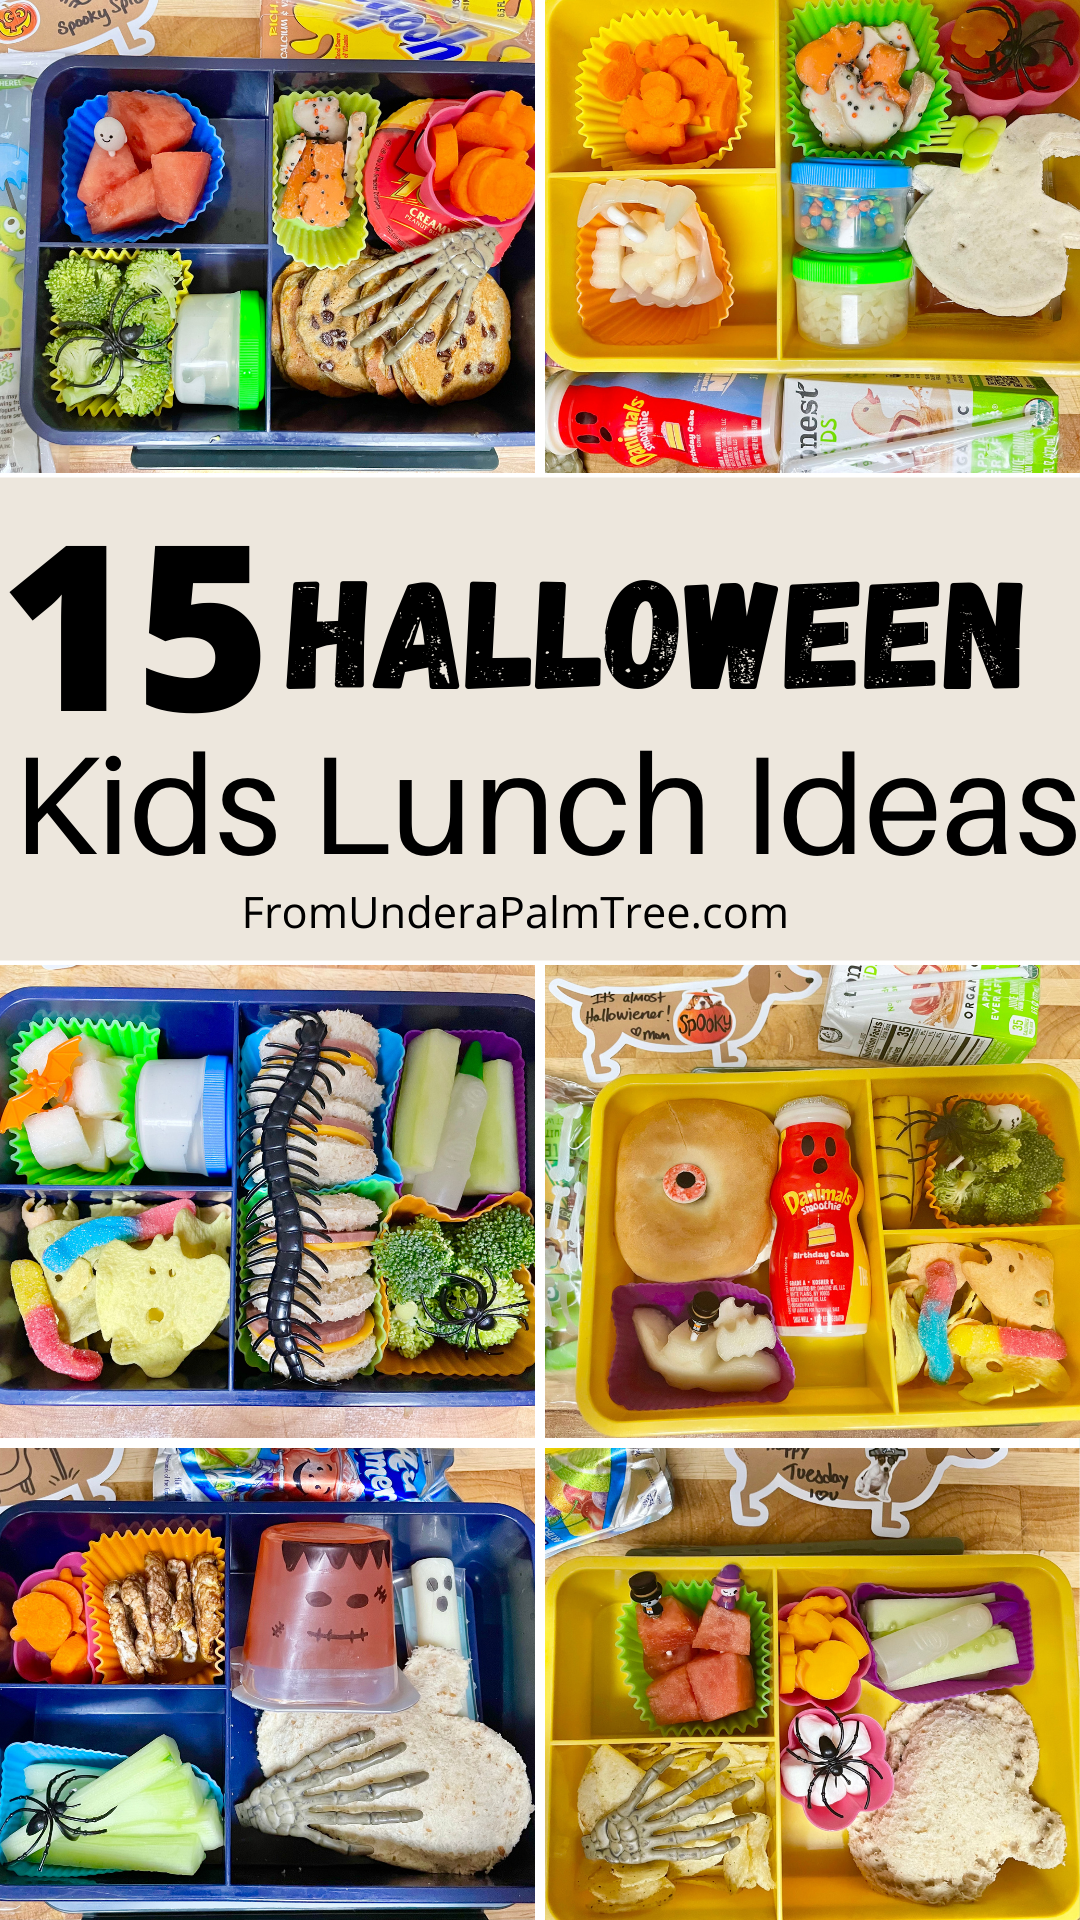 kids halloween lunches | halloween themed kids lunch | halloween kids lunch ideas | halloween lunches for kids | halloween kids lunch | spooky lunches for kids | spooky kids lunches | spooky kids lunch ideas | scary jello faces | meal planning for kids lunches | kids meal planning | halloween themed lunch | themed kids lunches | 